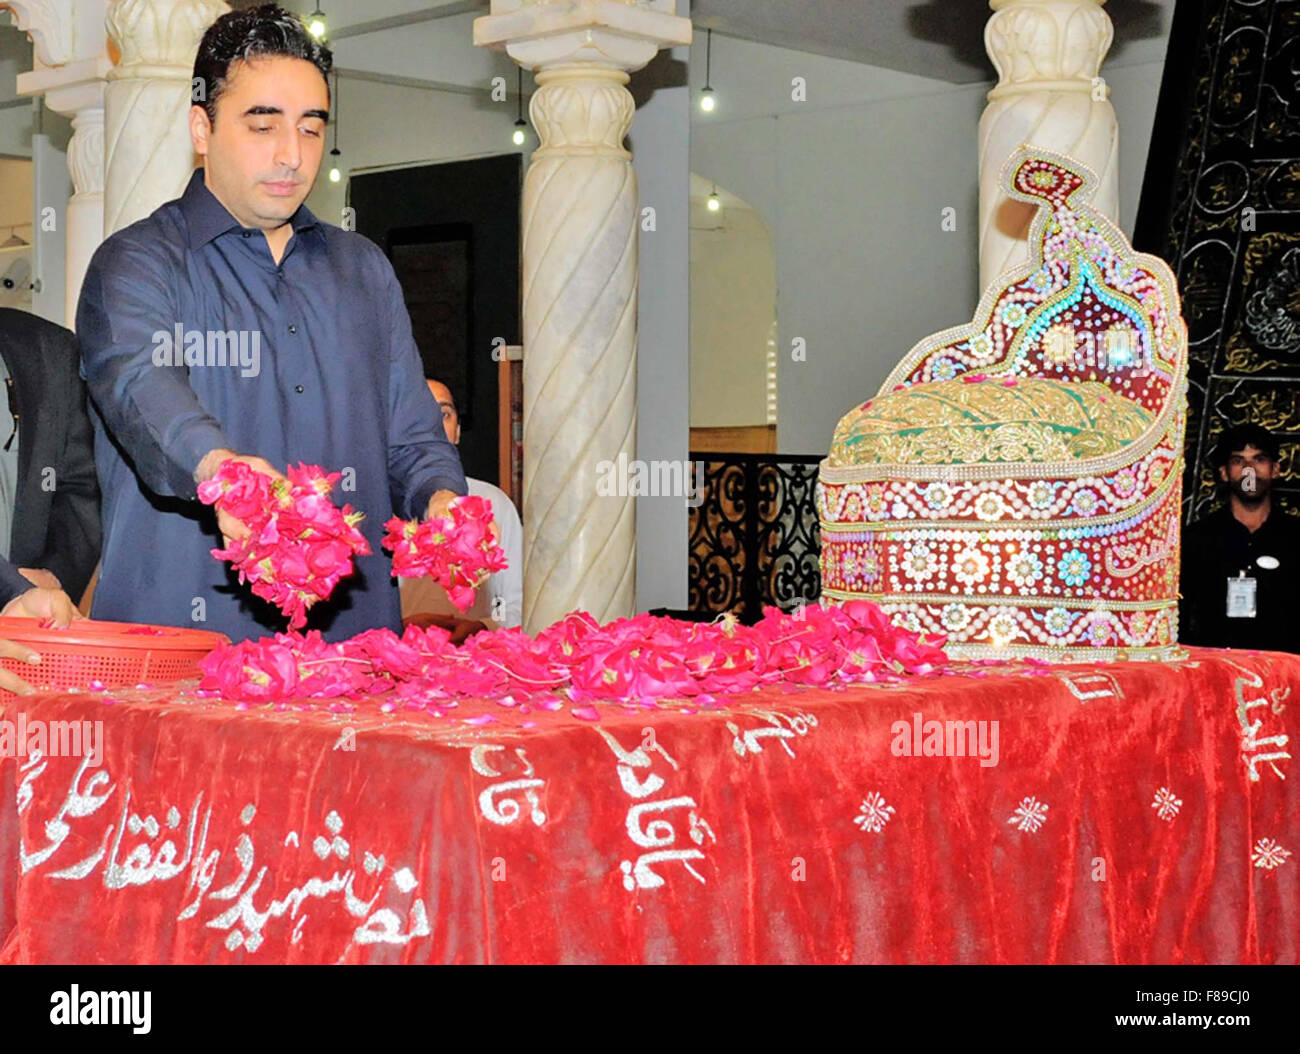 Chairman People Party (PPP) Bilawal Bhtto Zardari flowering on grave of founder People Party Zulfiqar Ali Bhutto, in Garhi Khuda Bux on Monday, December 07, 2015. Stock Photo